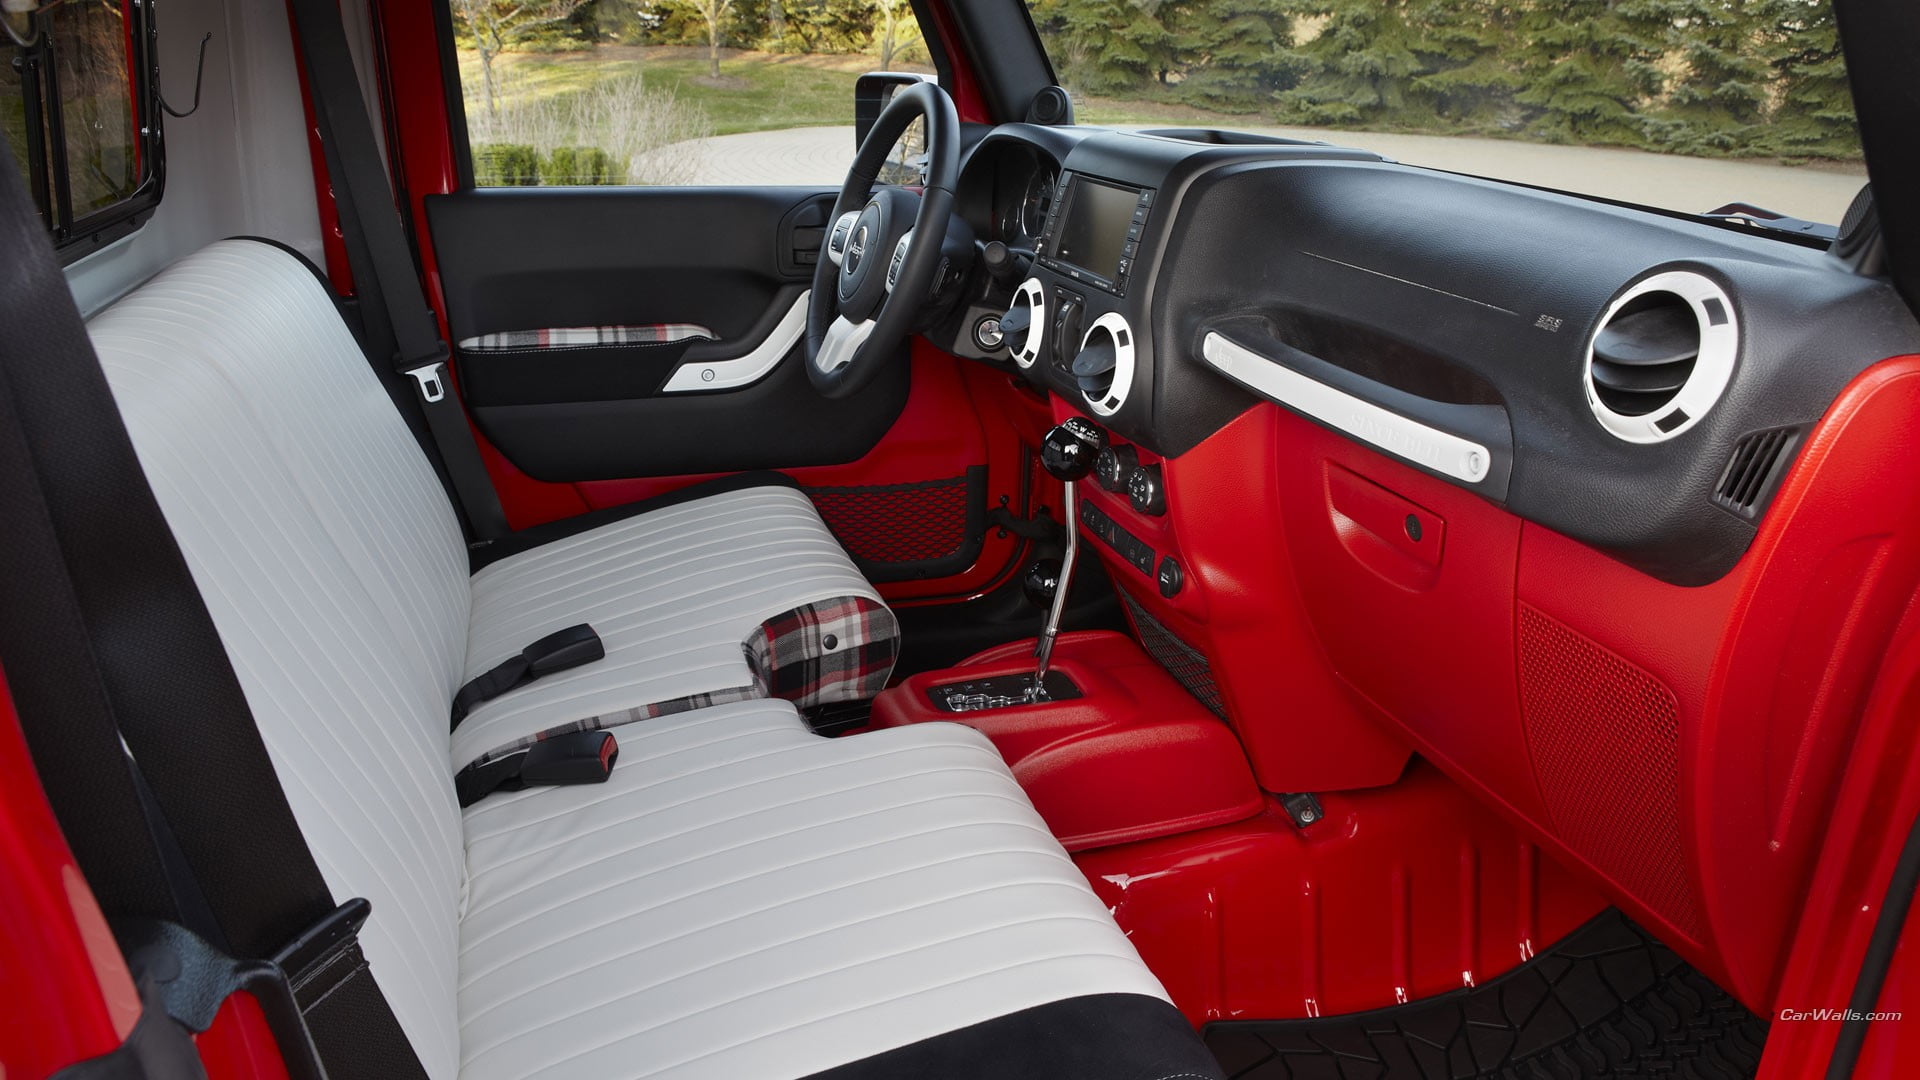 Red And Black Vehicle Interior Jeep J 12 Concept Cars Car